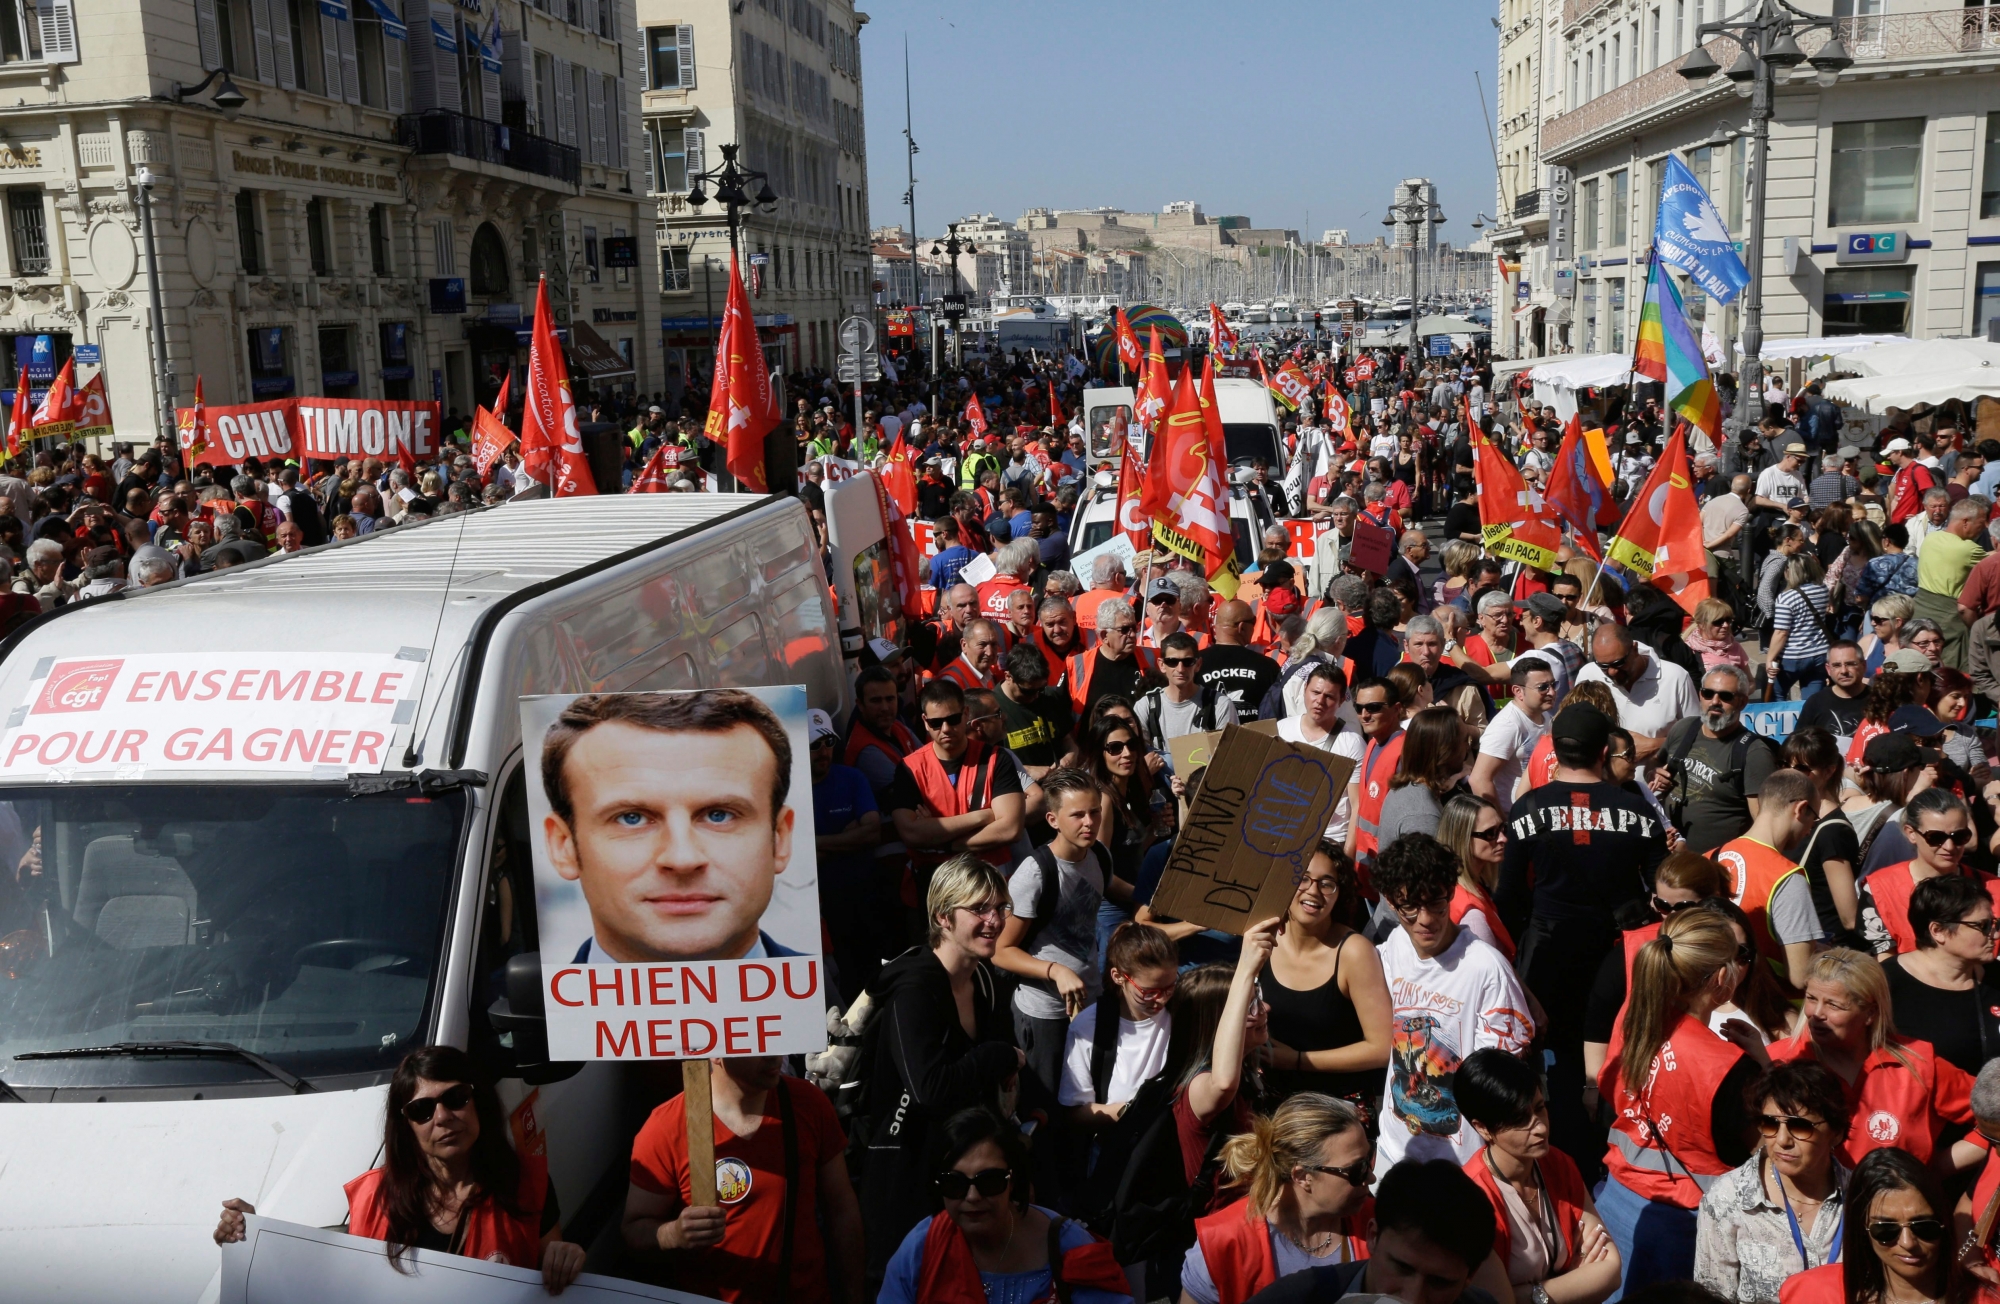 Rail workers and civil servants demonstrate in the Old Port in Marseille, southern France, Thursday, April, 19, Rail workers and civil servants demonstrate in Marseille, southern France, Thursday, April, 19, 2018. Thousands of people are expected to march in protest at French President Emmanuel Macron's reforms as rail strikes and student protests continue to shake the country. Rail workers have this week resumed their rolling strike aimed at fighting Macron's plans to revamp the national railway company SNCF before the network is opened to competition, while students continue to occupy campuses across France. (AP Photo/Claude Paris) France Strikes